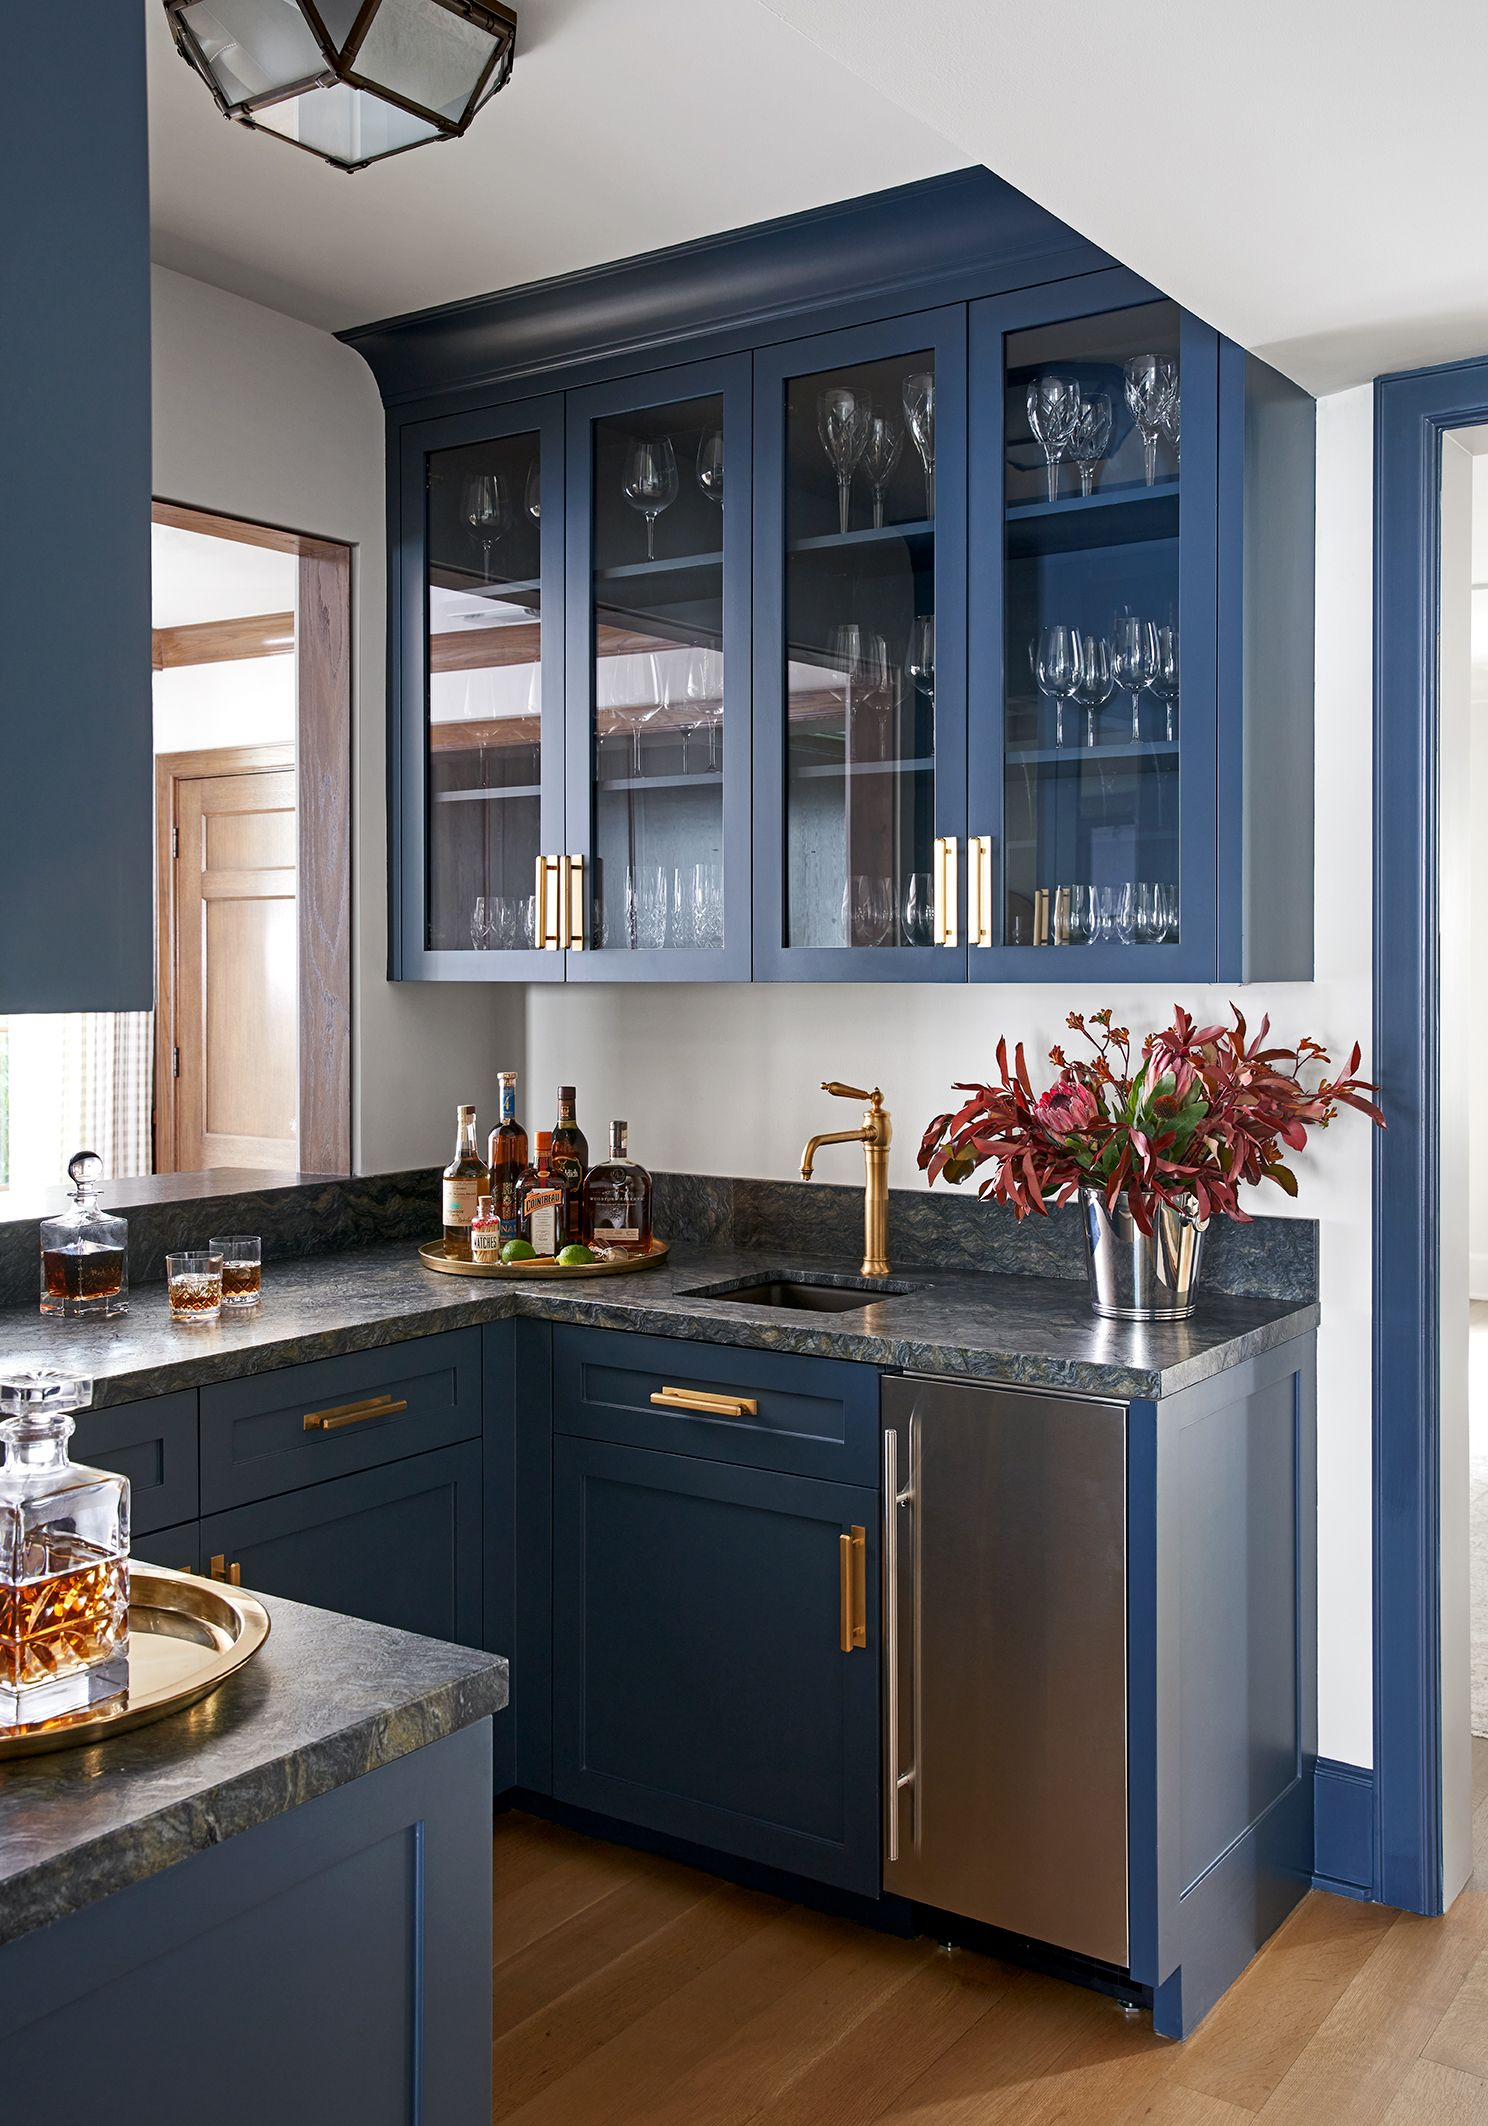 For this classic bar, we opted for a rich blue tone we love.